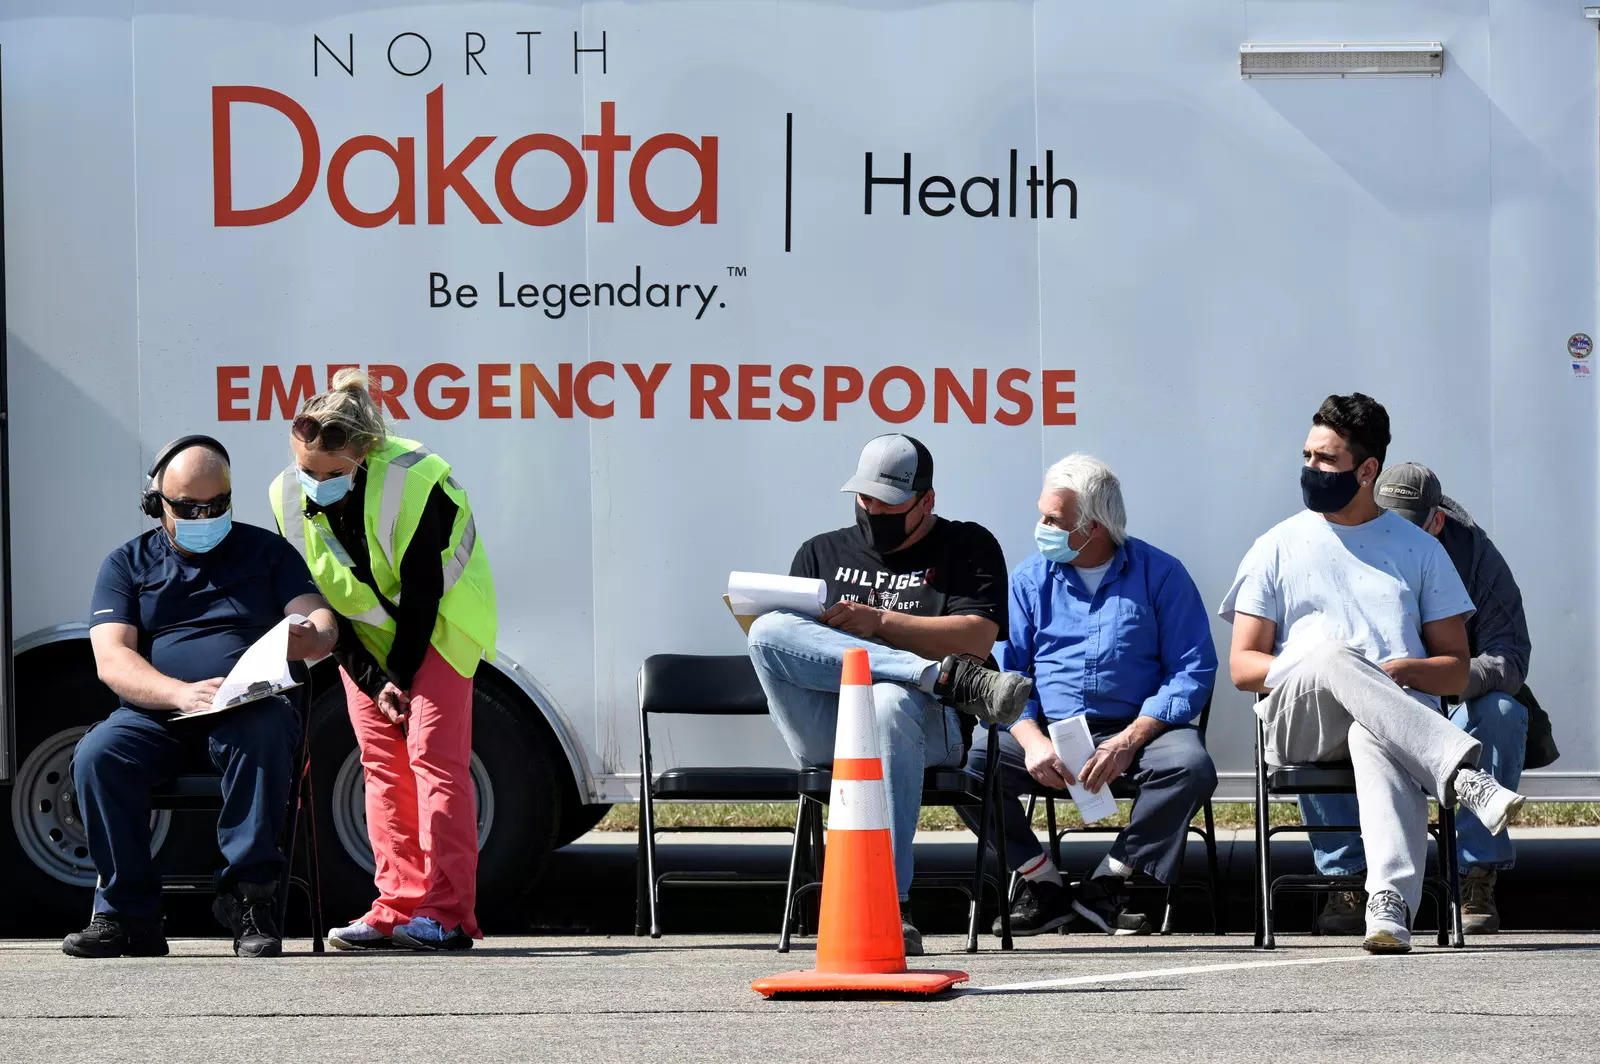 People rest in chairs after being vaccinated against coronavirus disease at a rest stop near Drayton, North Dakota.